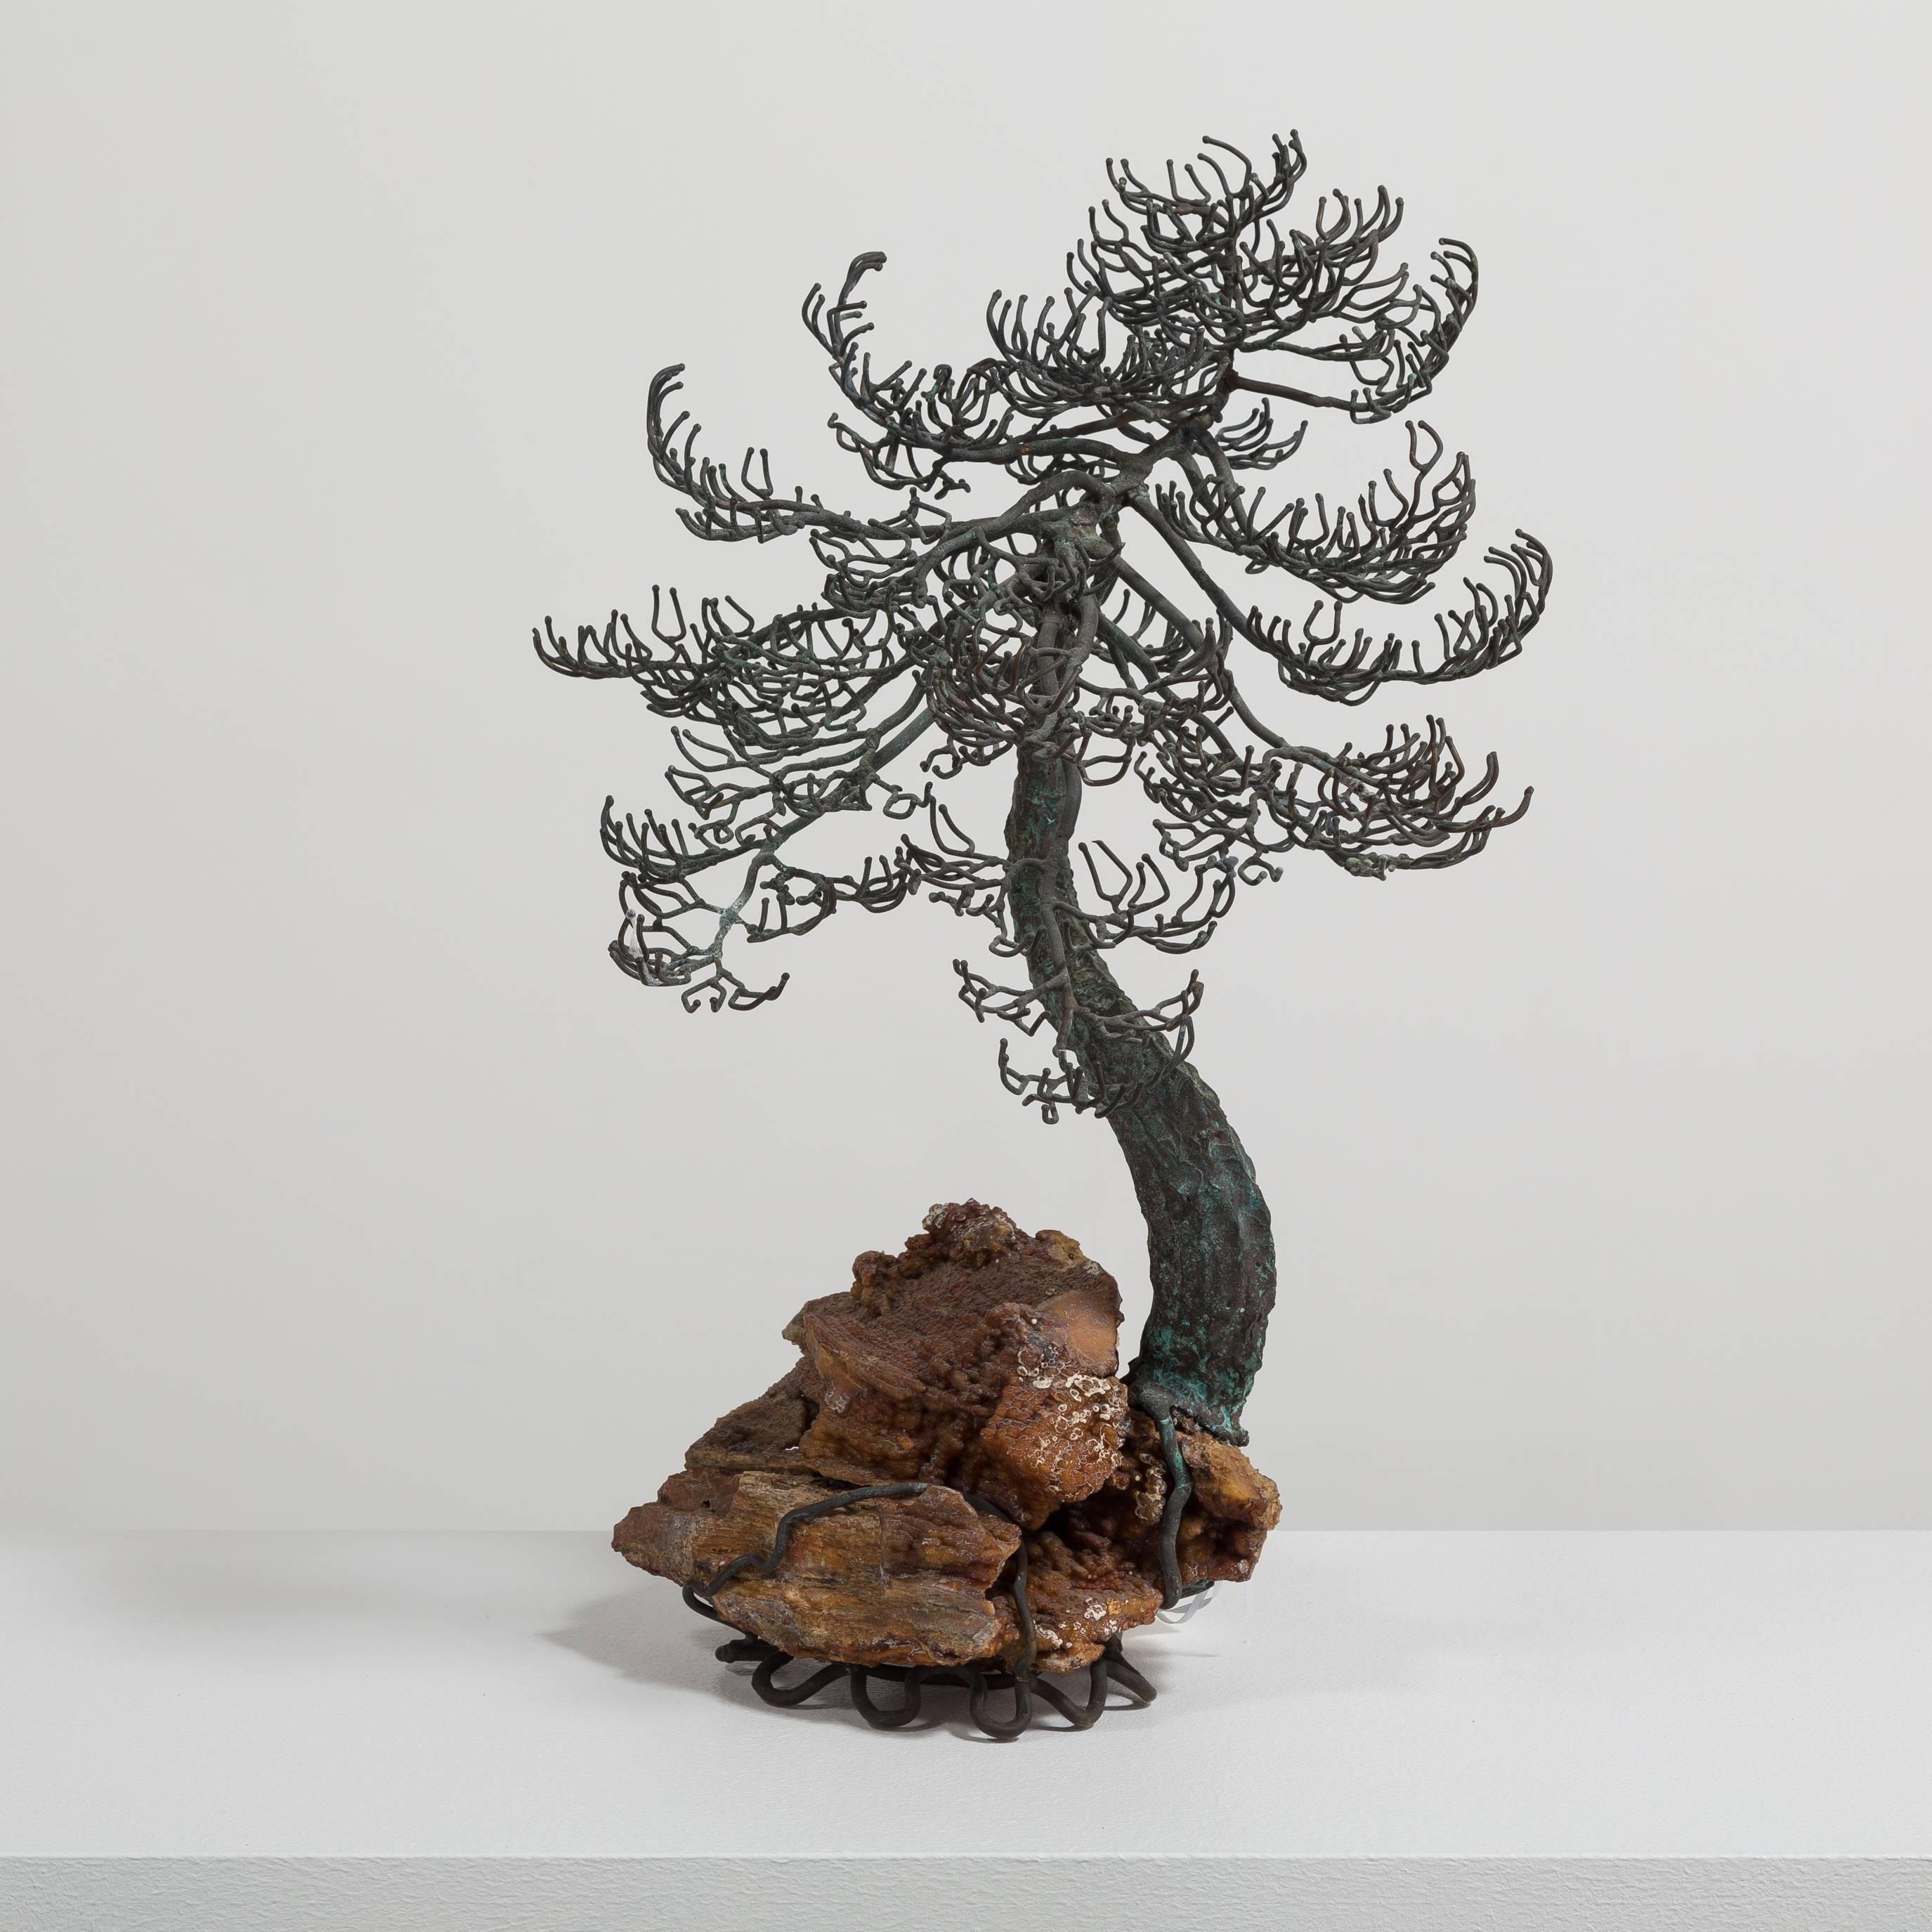 A Superb Bonsai Tree Table Sculpture in Bronze Showing a Gnarled Twisted Tree in Winter Mounted on a Specimen Rocky Base Mid 1960s

Bonsai started in Japan in the 6th century. Bonsai or the art of Pen Jung translates to tray planting. Originally,